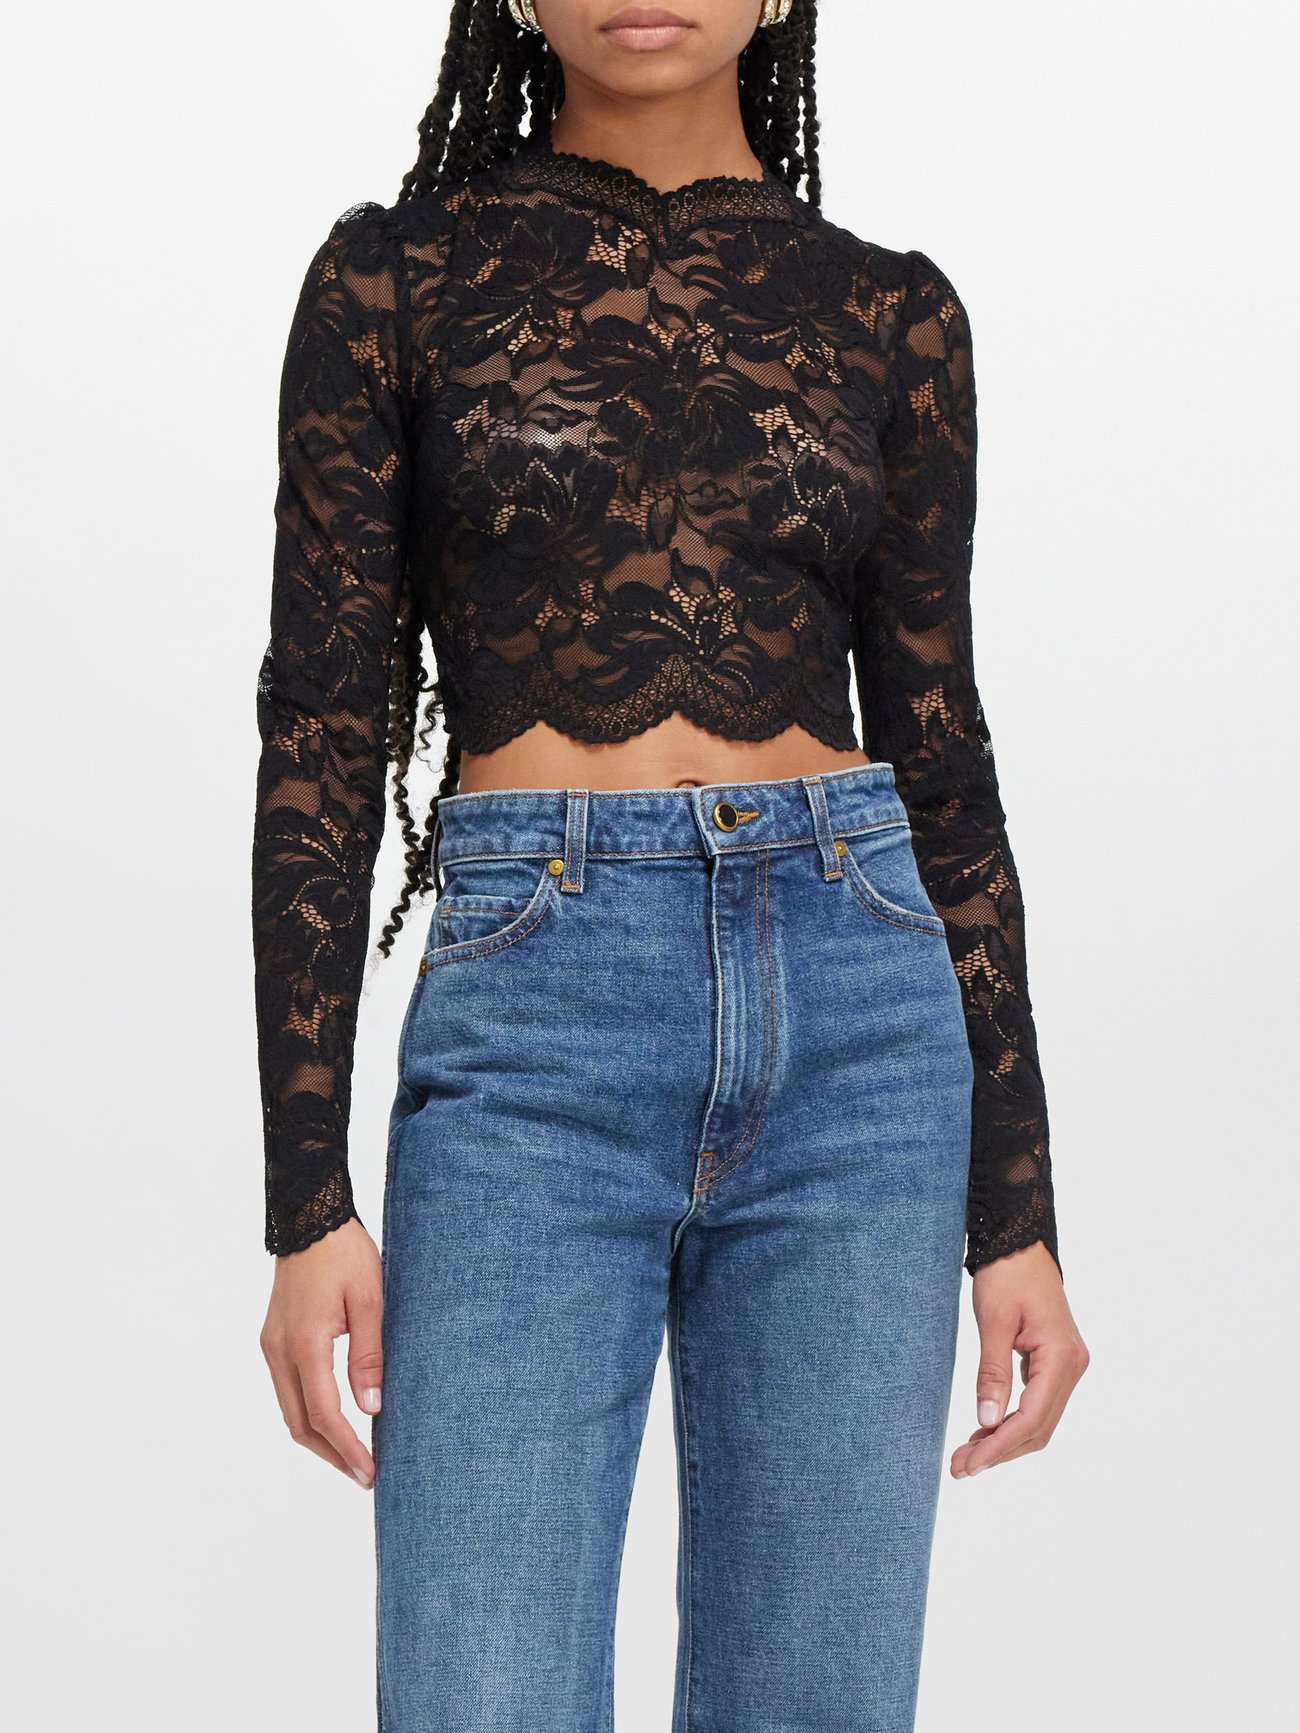 GG-Lace Top Ekseption